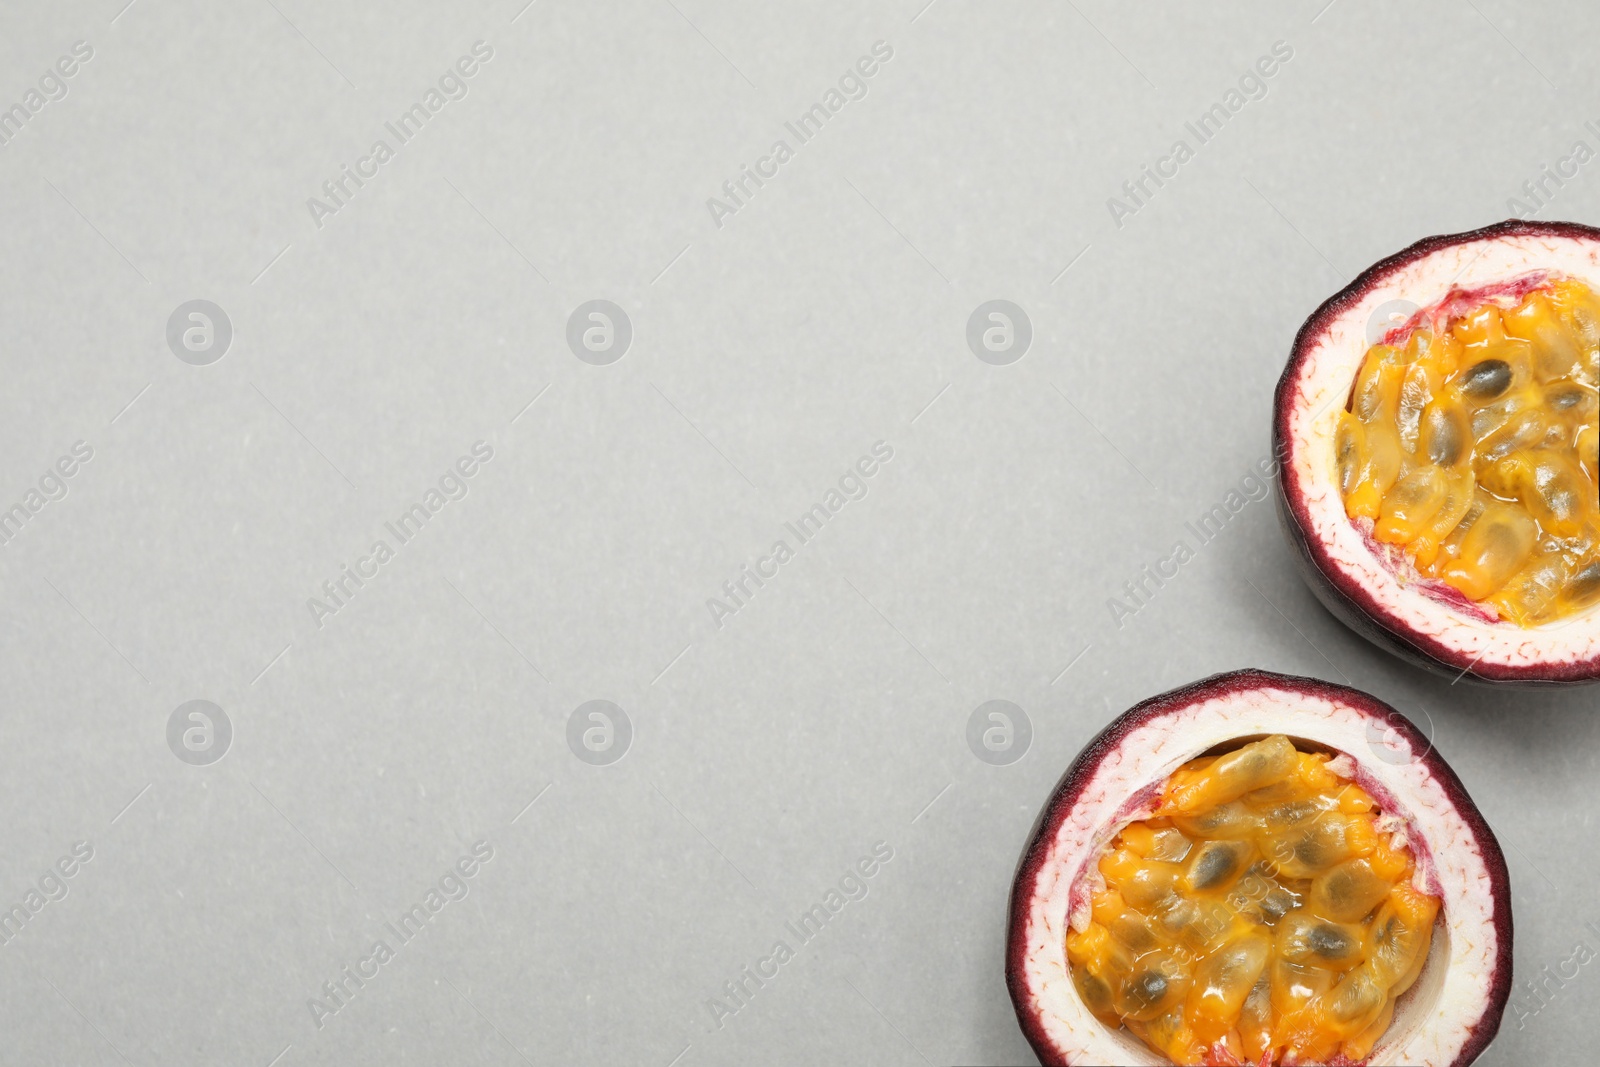 Photo of Halves of fresh ripe passion fruit (maracuya) on grey background, flat lay. Space for text